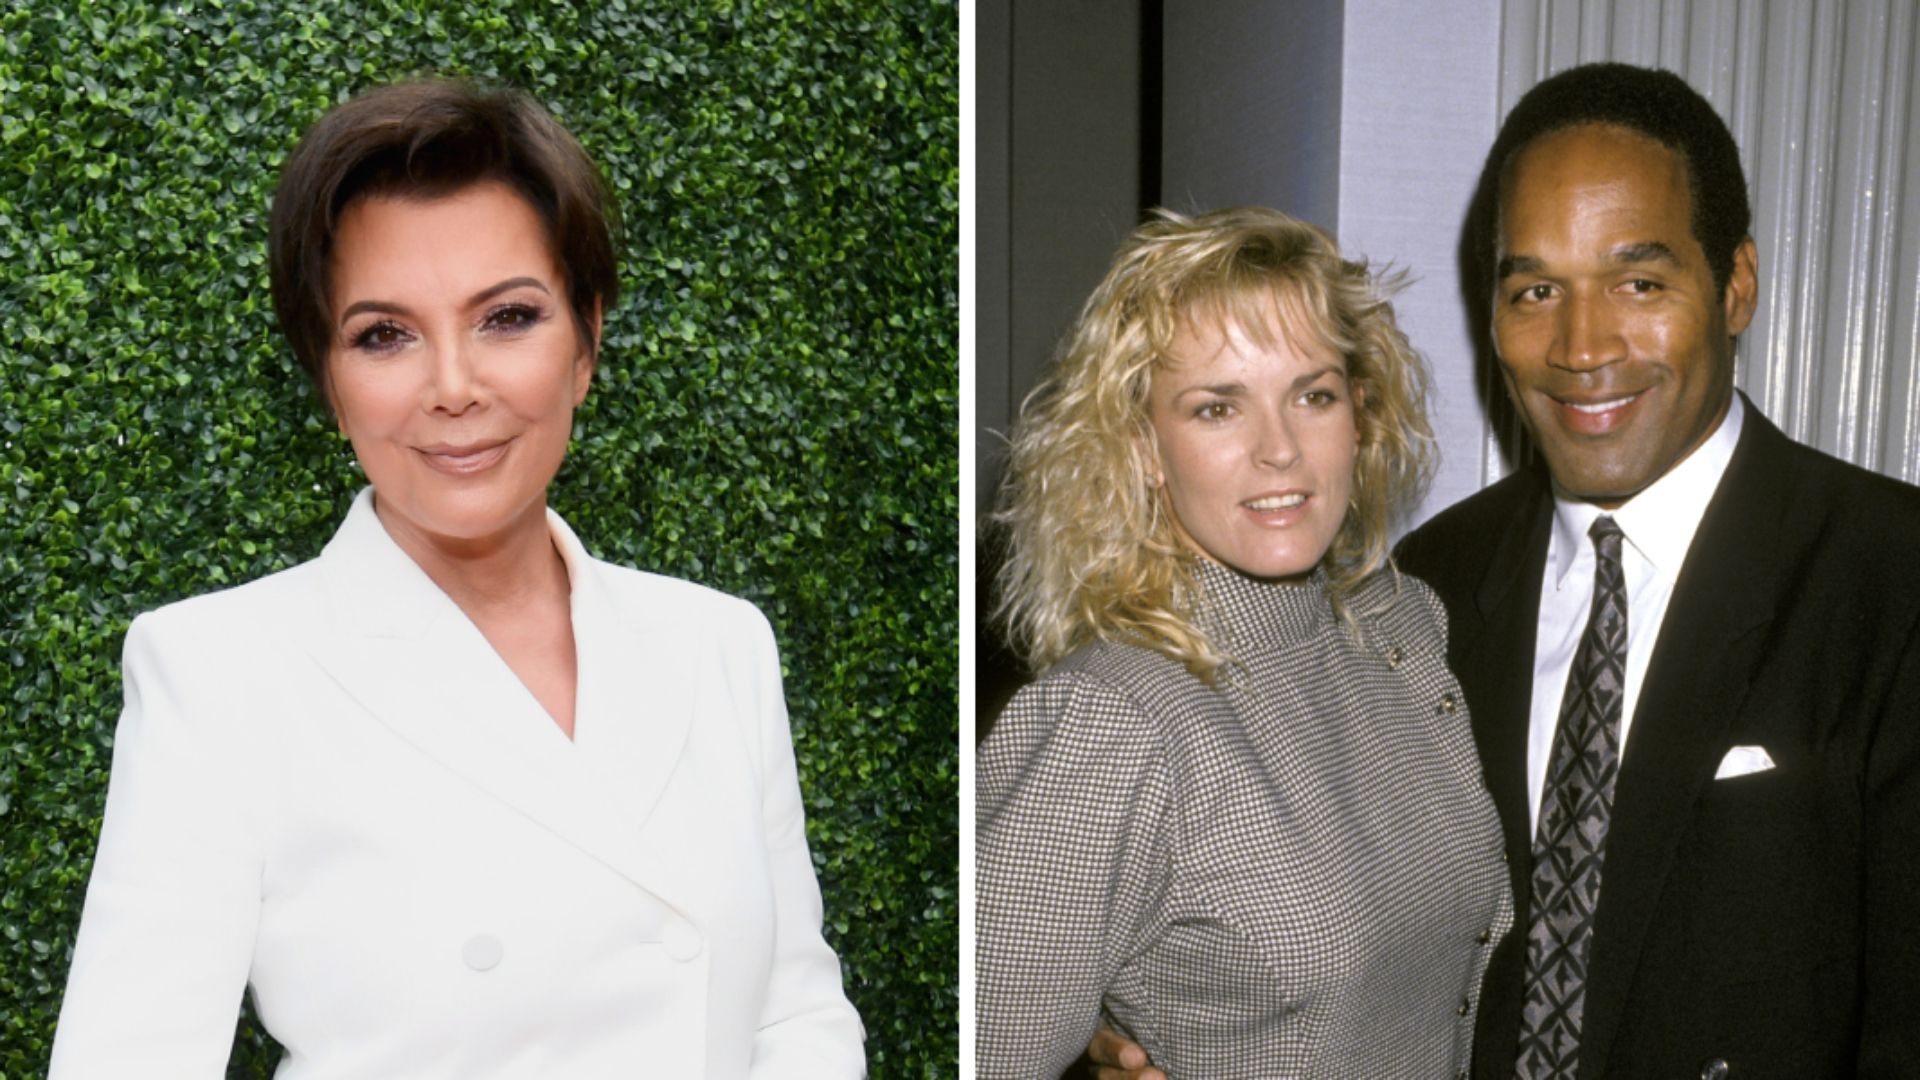 Split photo of Kris Jenner, and O.J. Simpson with his former wife Nicole Brown